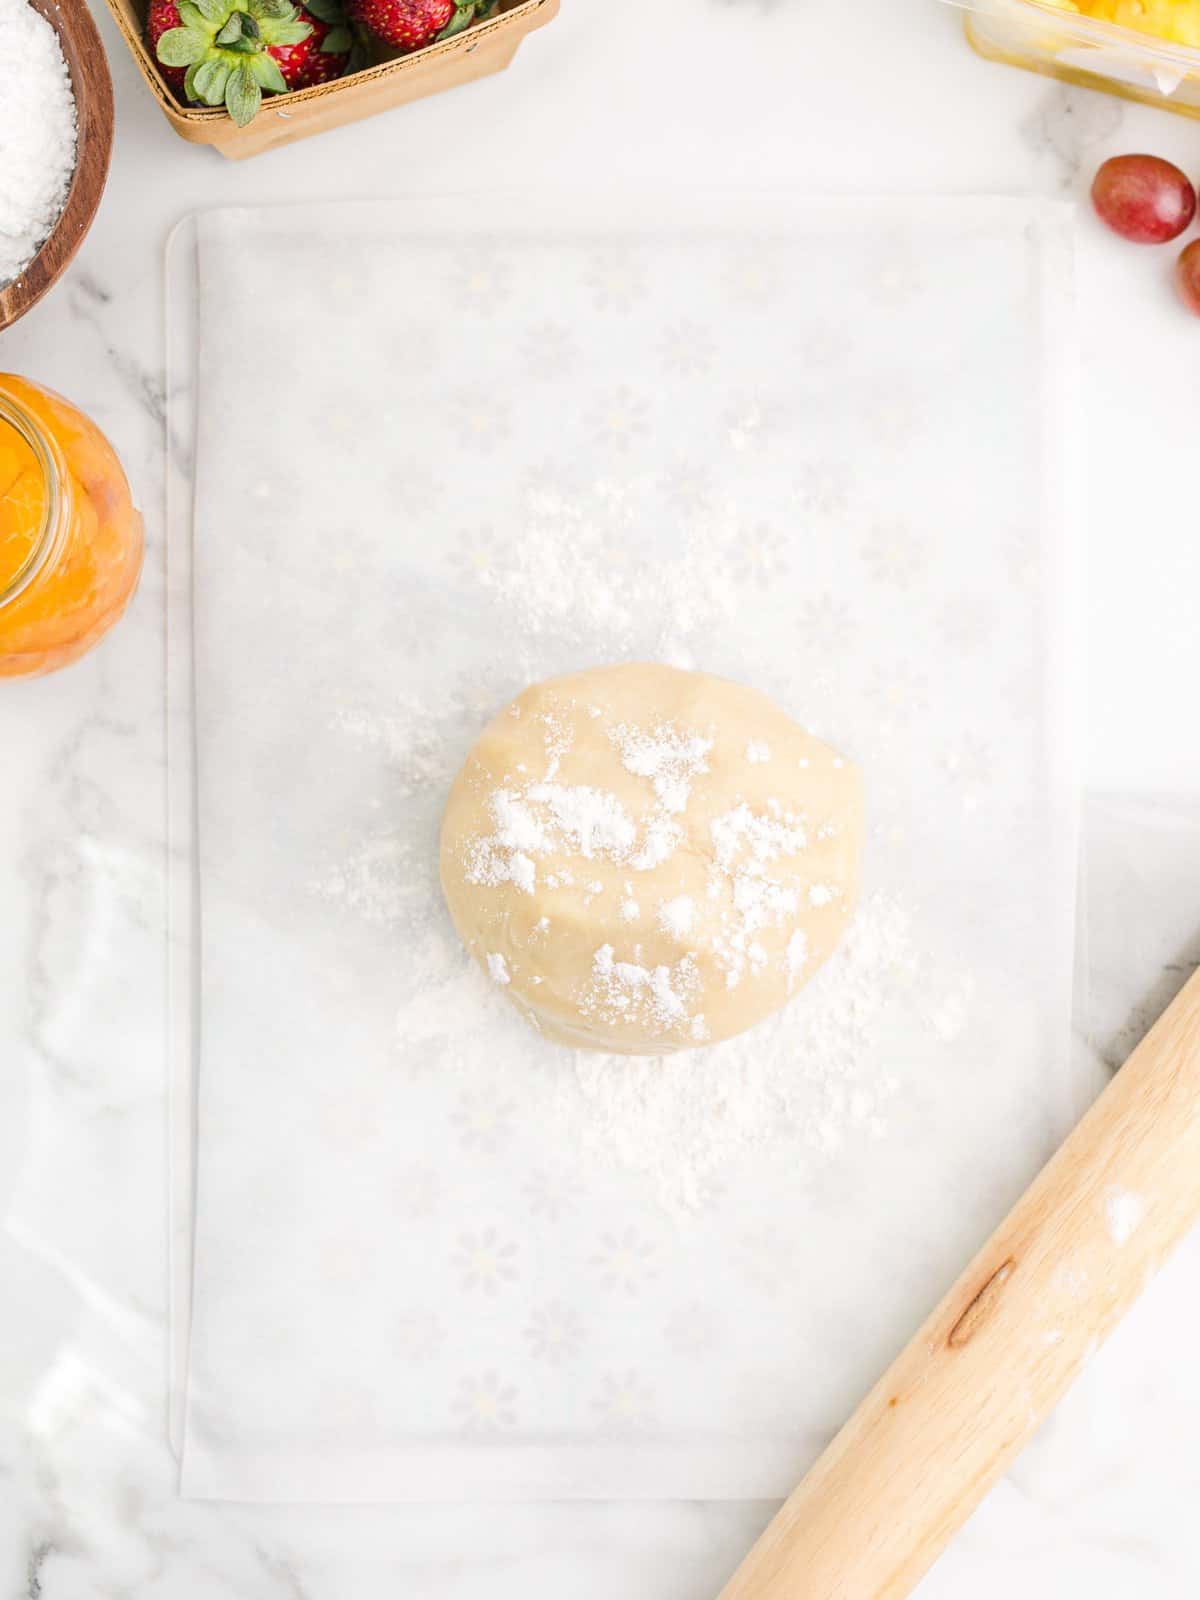 Cookie dough formed into a ball with flour on parchment paper.